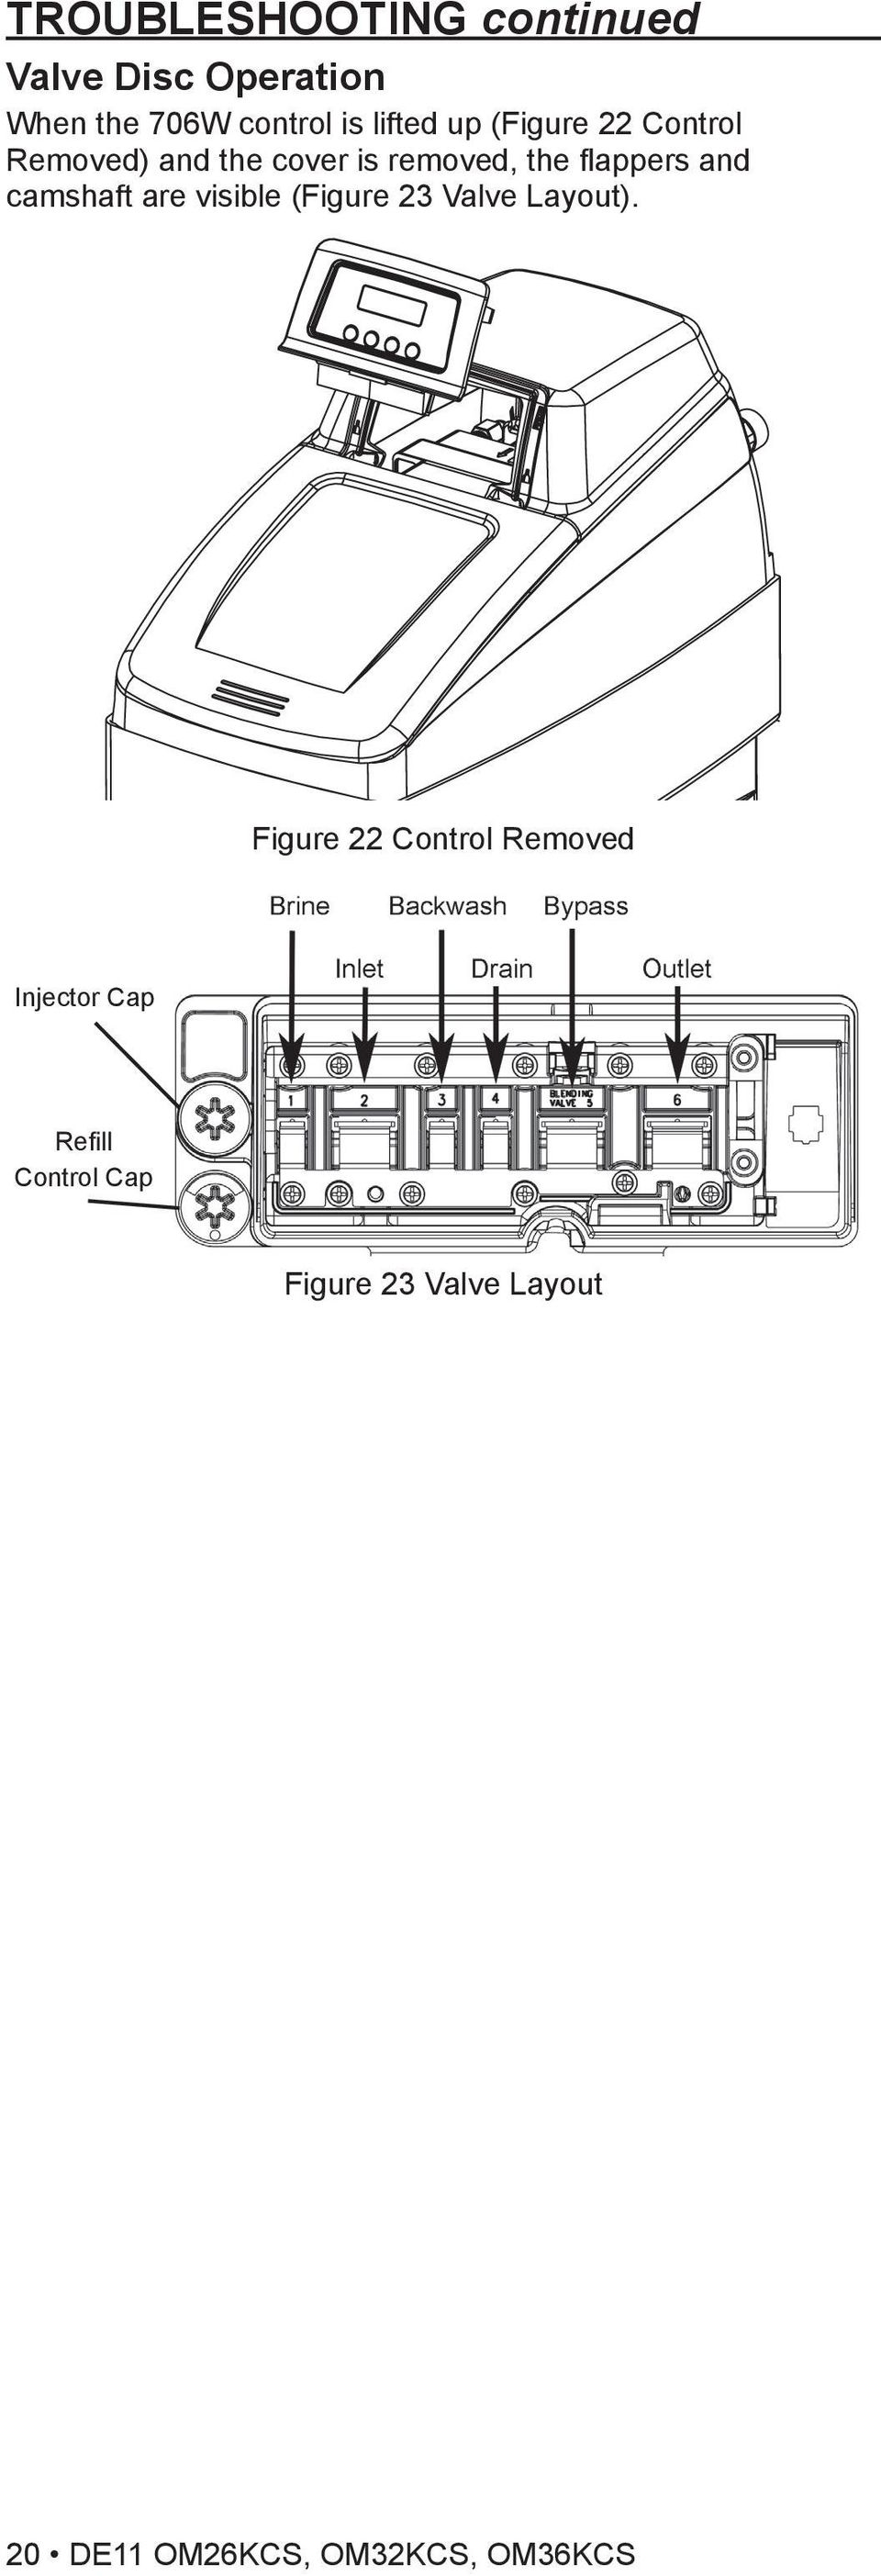 camshaft are visible (Figure 23 Valve Layout).